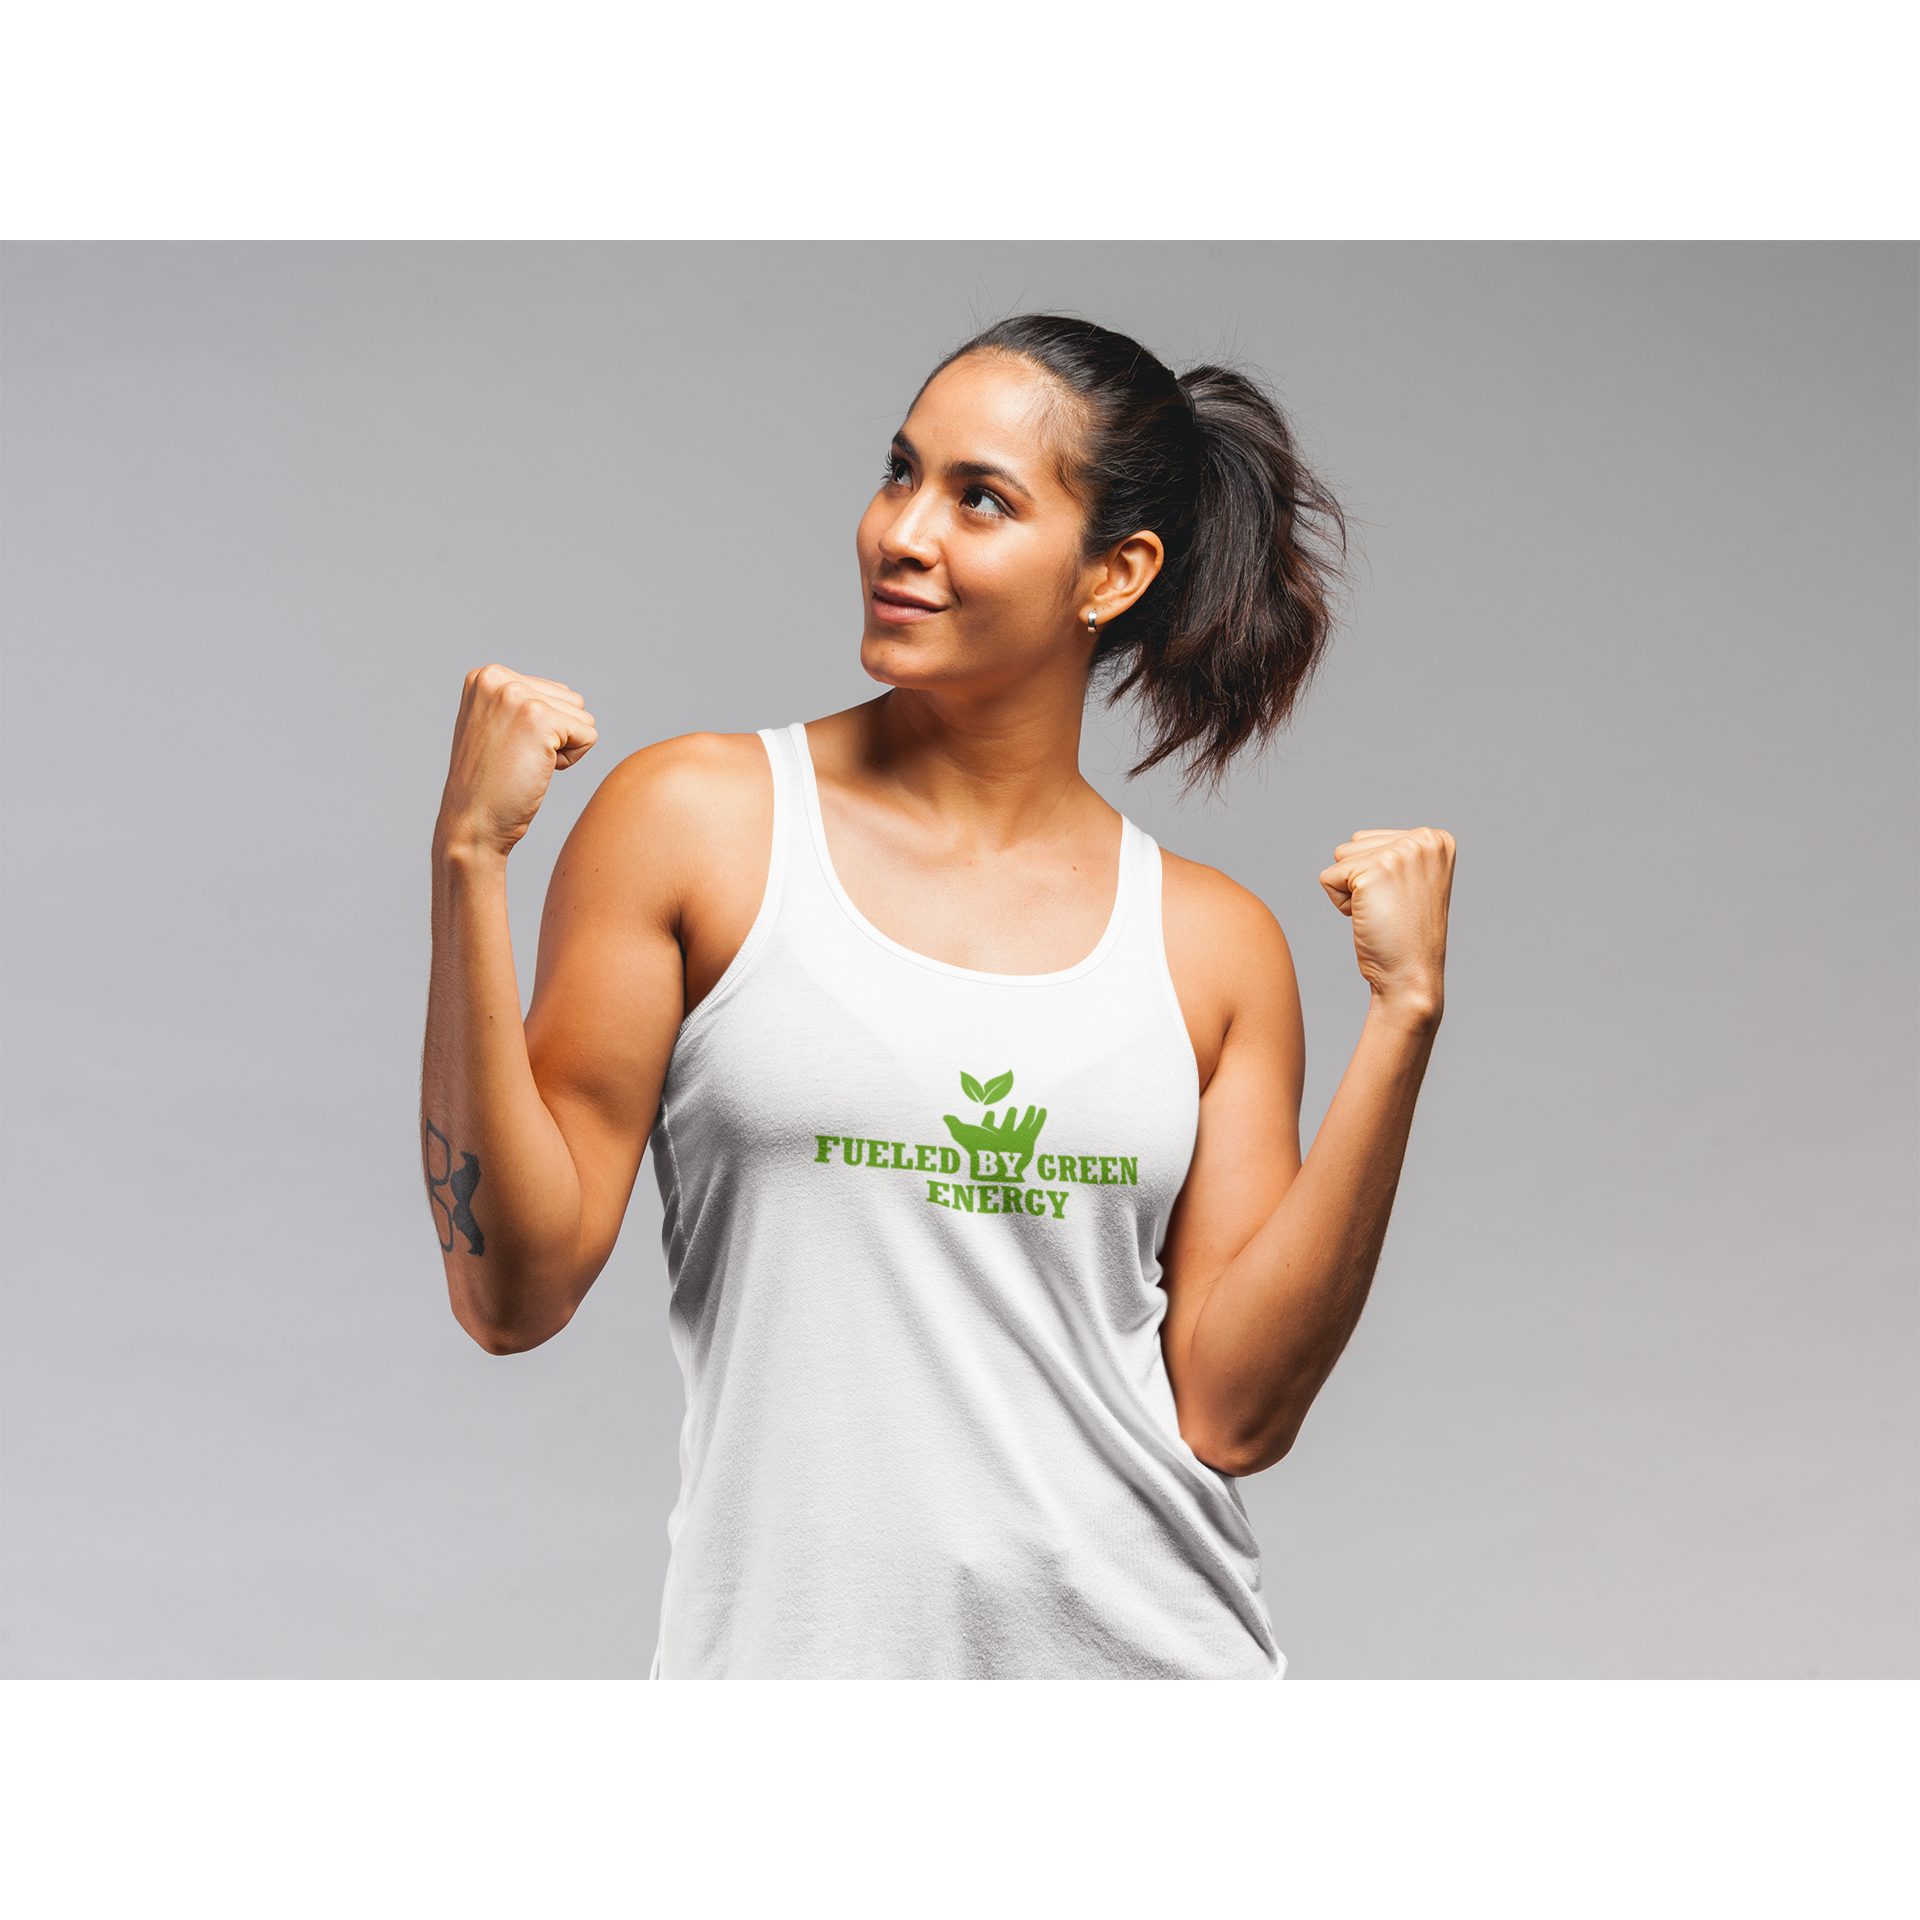 vegan tank top saying fueled by green energy worn by a woman flexing her biceps